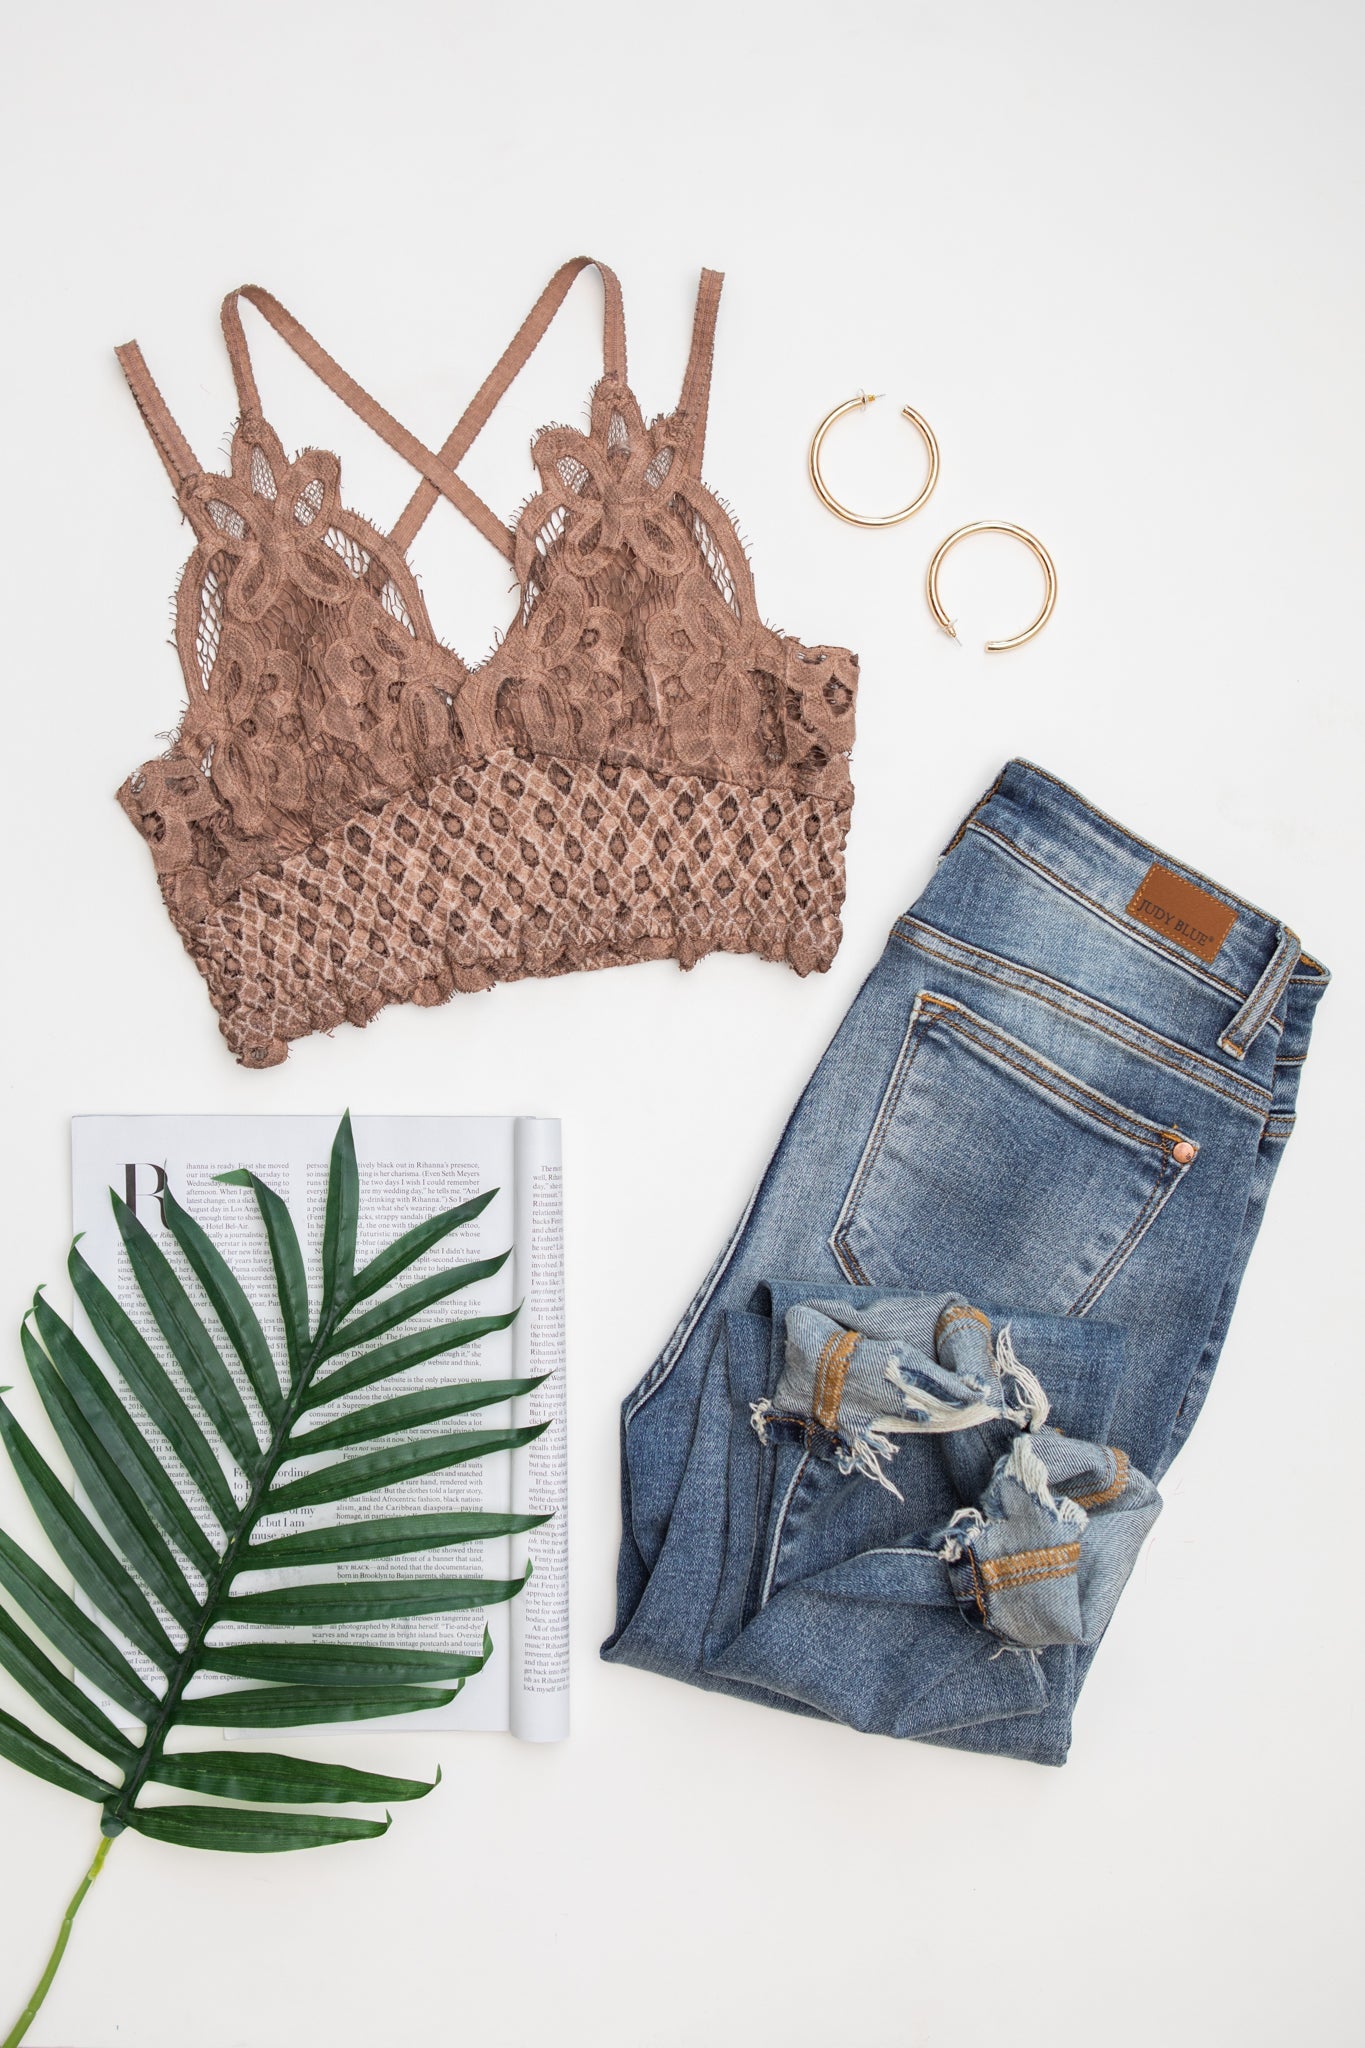 This beautiful lace bralette is perfect for layering. This lightweight, medium support bralette brings a feminine touch to any outfit. Pair it with a t-shirt or oversized sweater for a comfortable and flirty look! S - XL